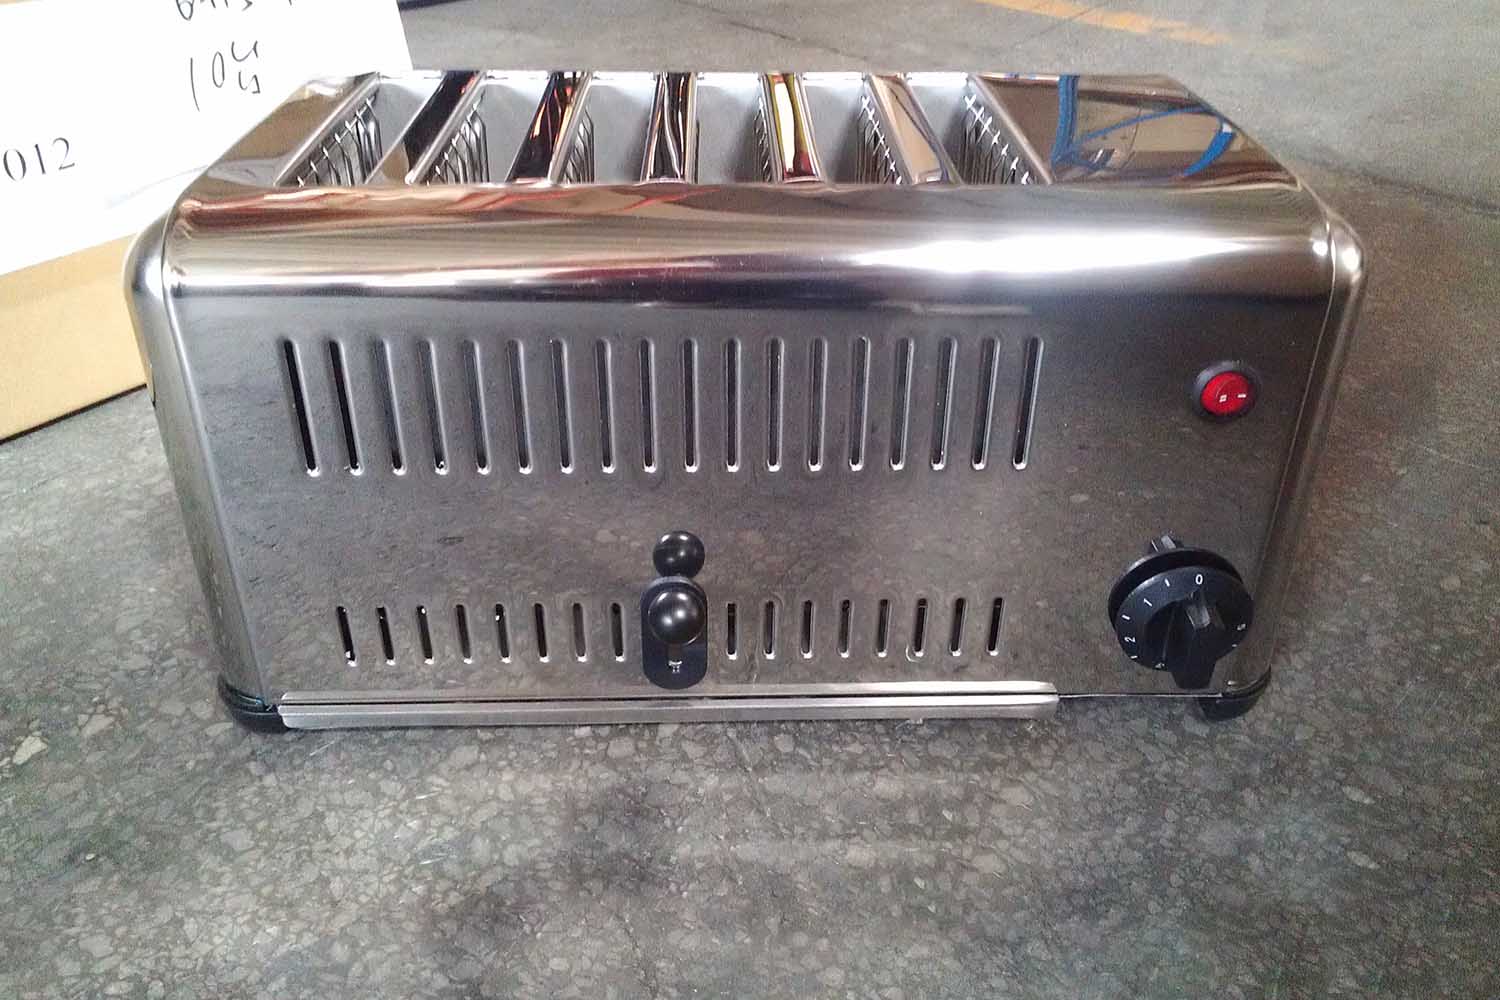 Front View of Commercial Bread Toaster